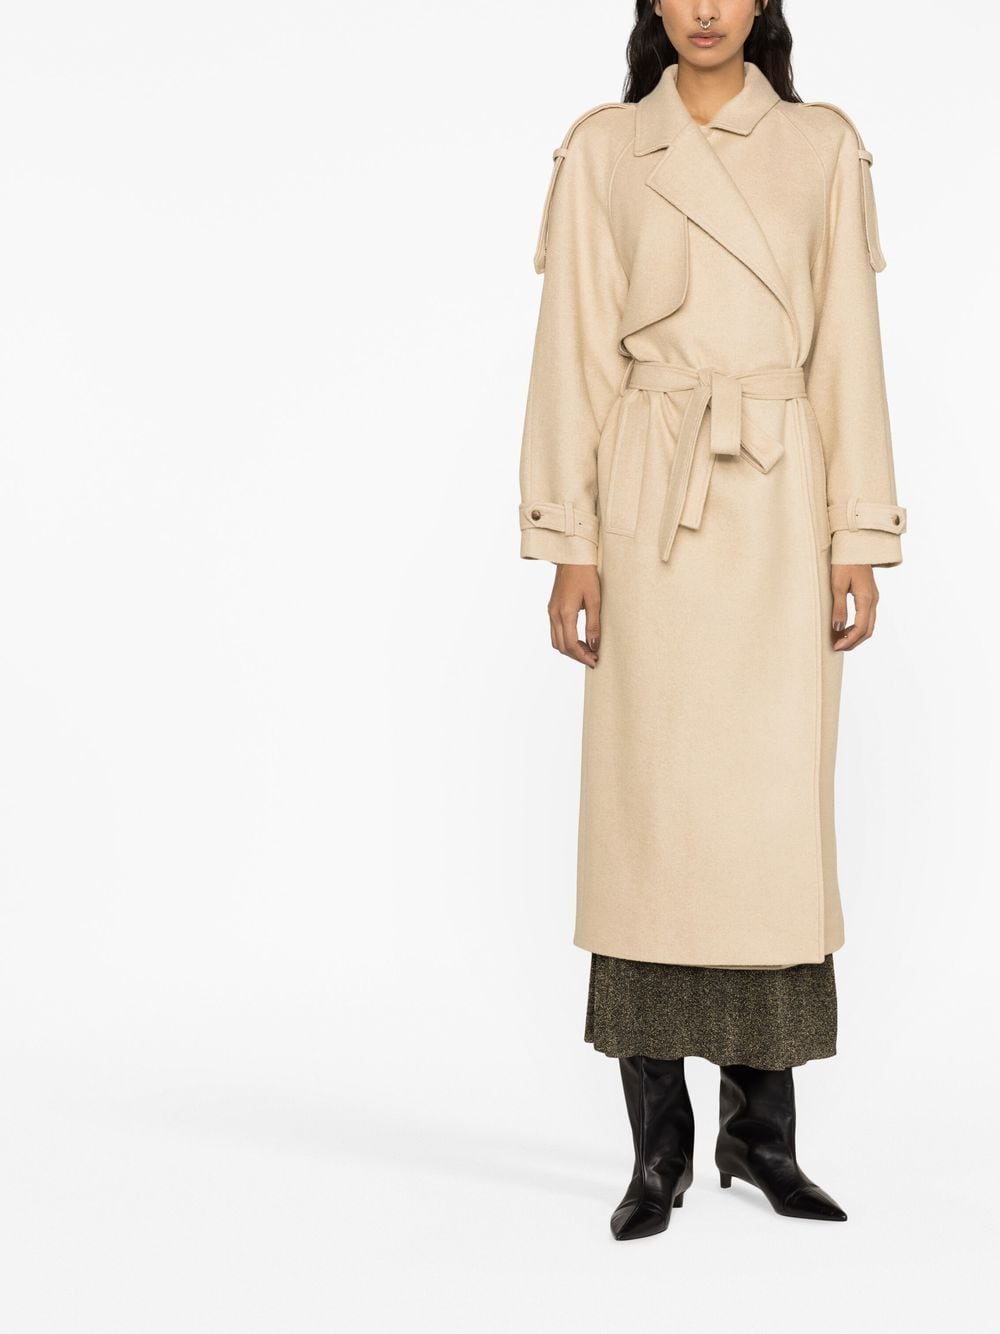 The Frankie Shop Suzanne Belted Trench Coat - Farfetch